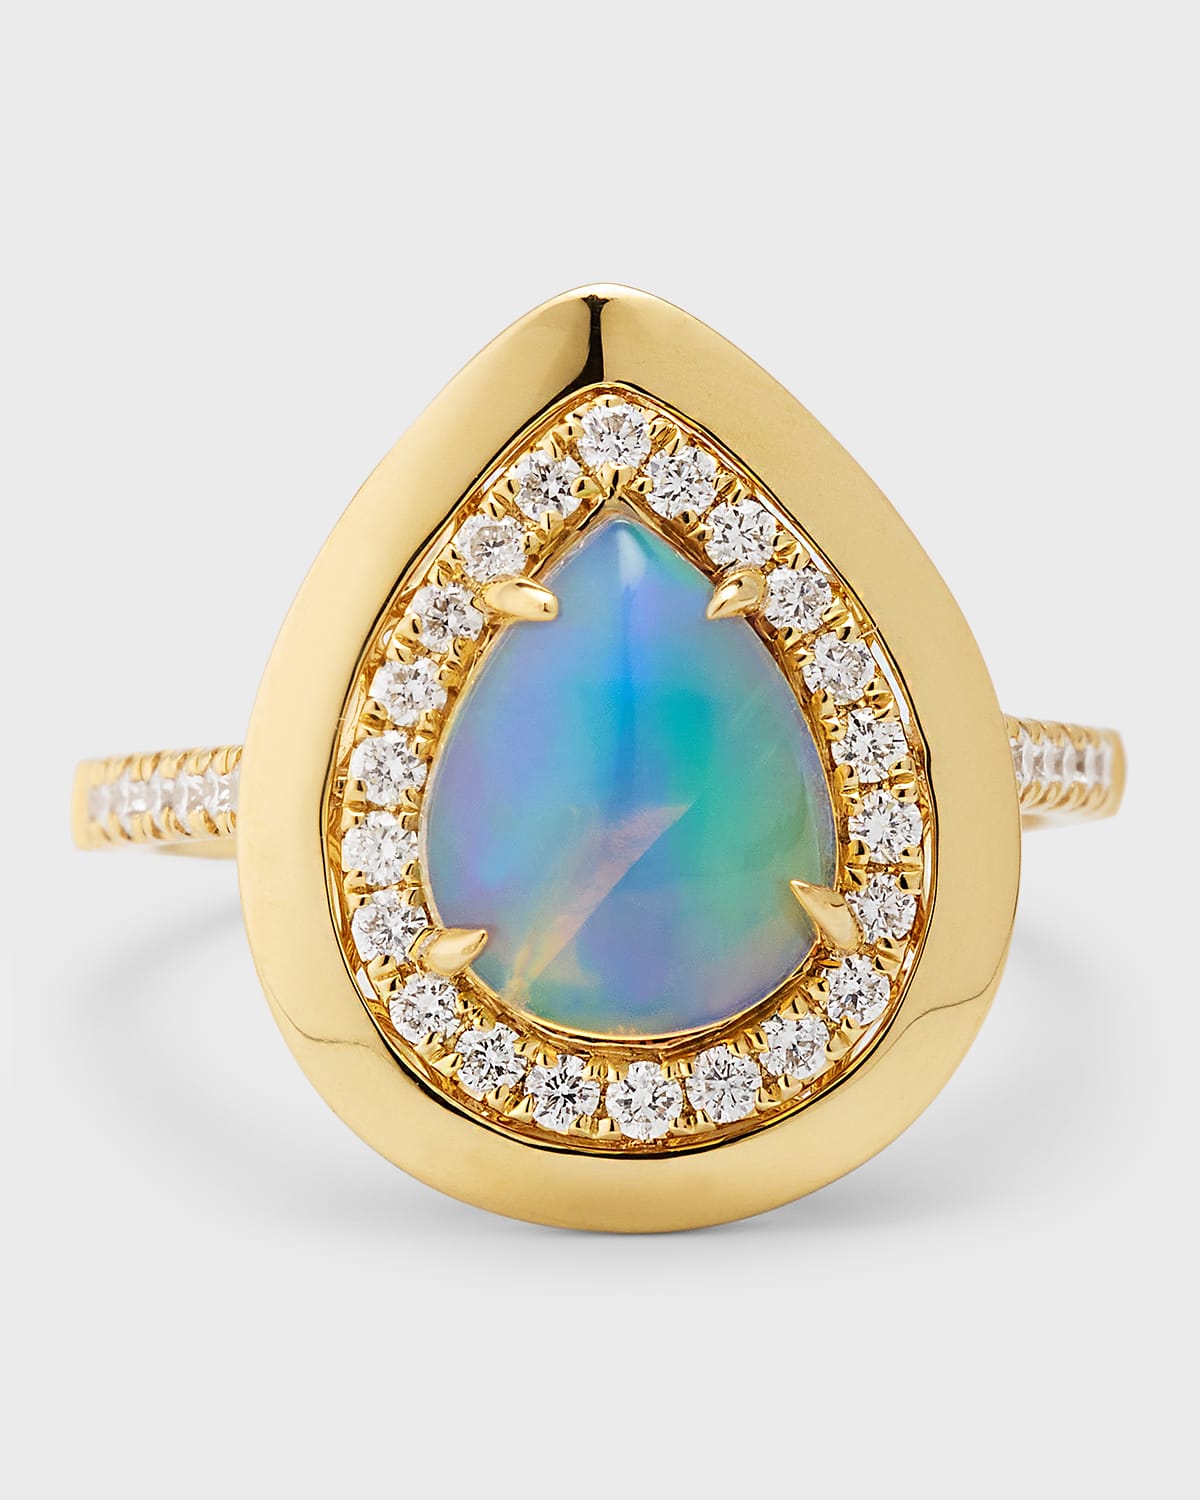 18K Yellow Gold Ring with Pear Shape Opal and Diamonds, Size 7